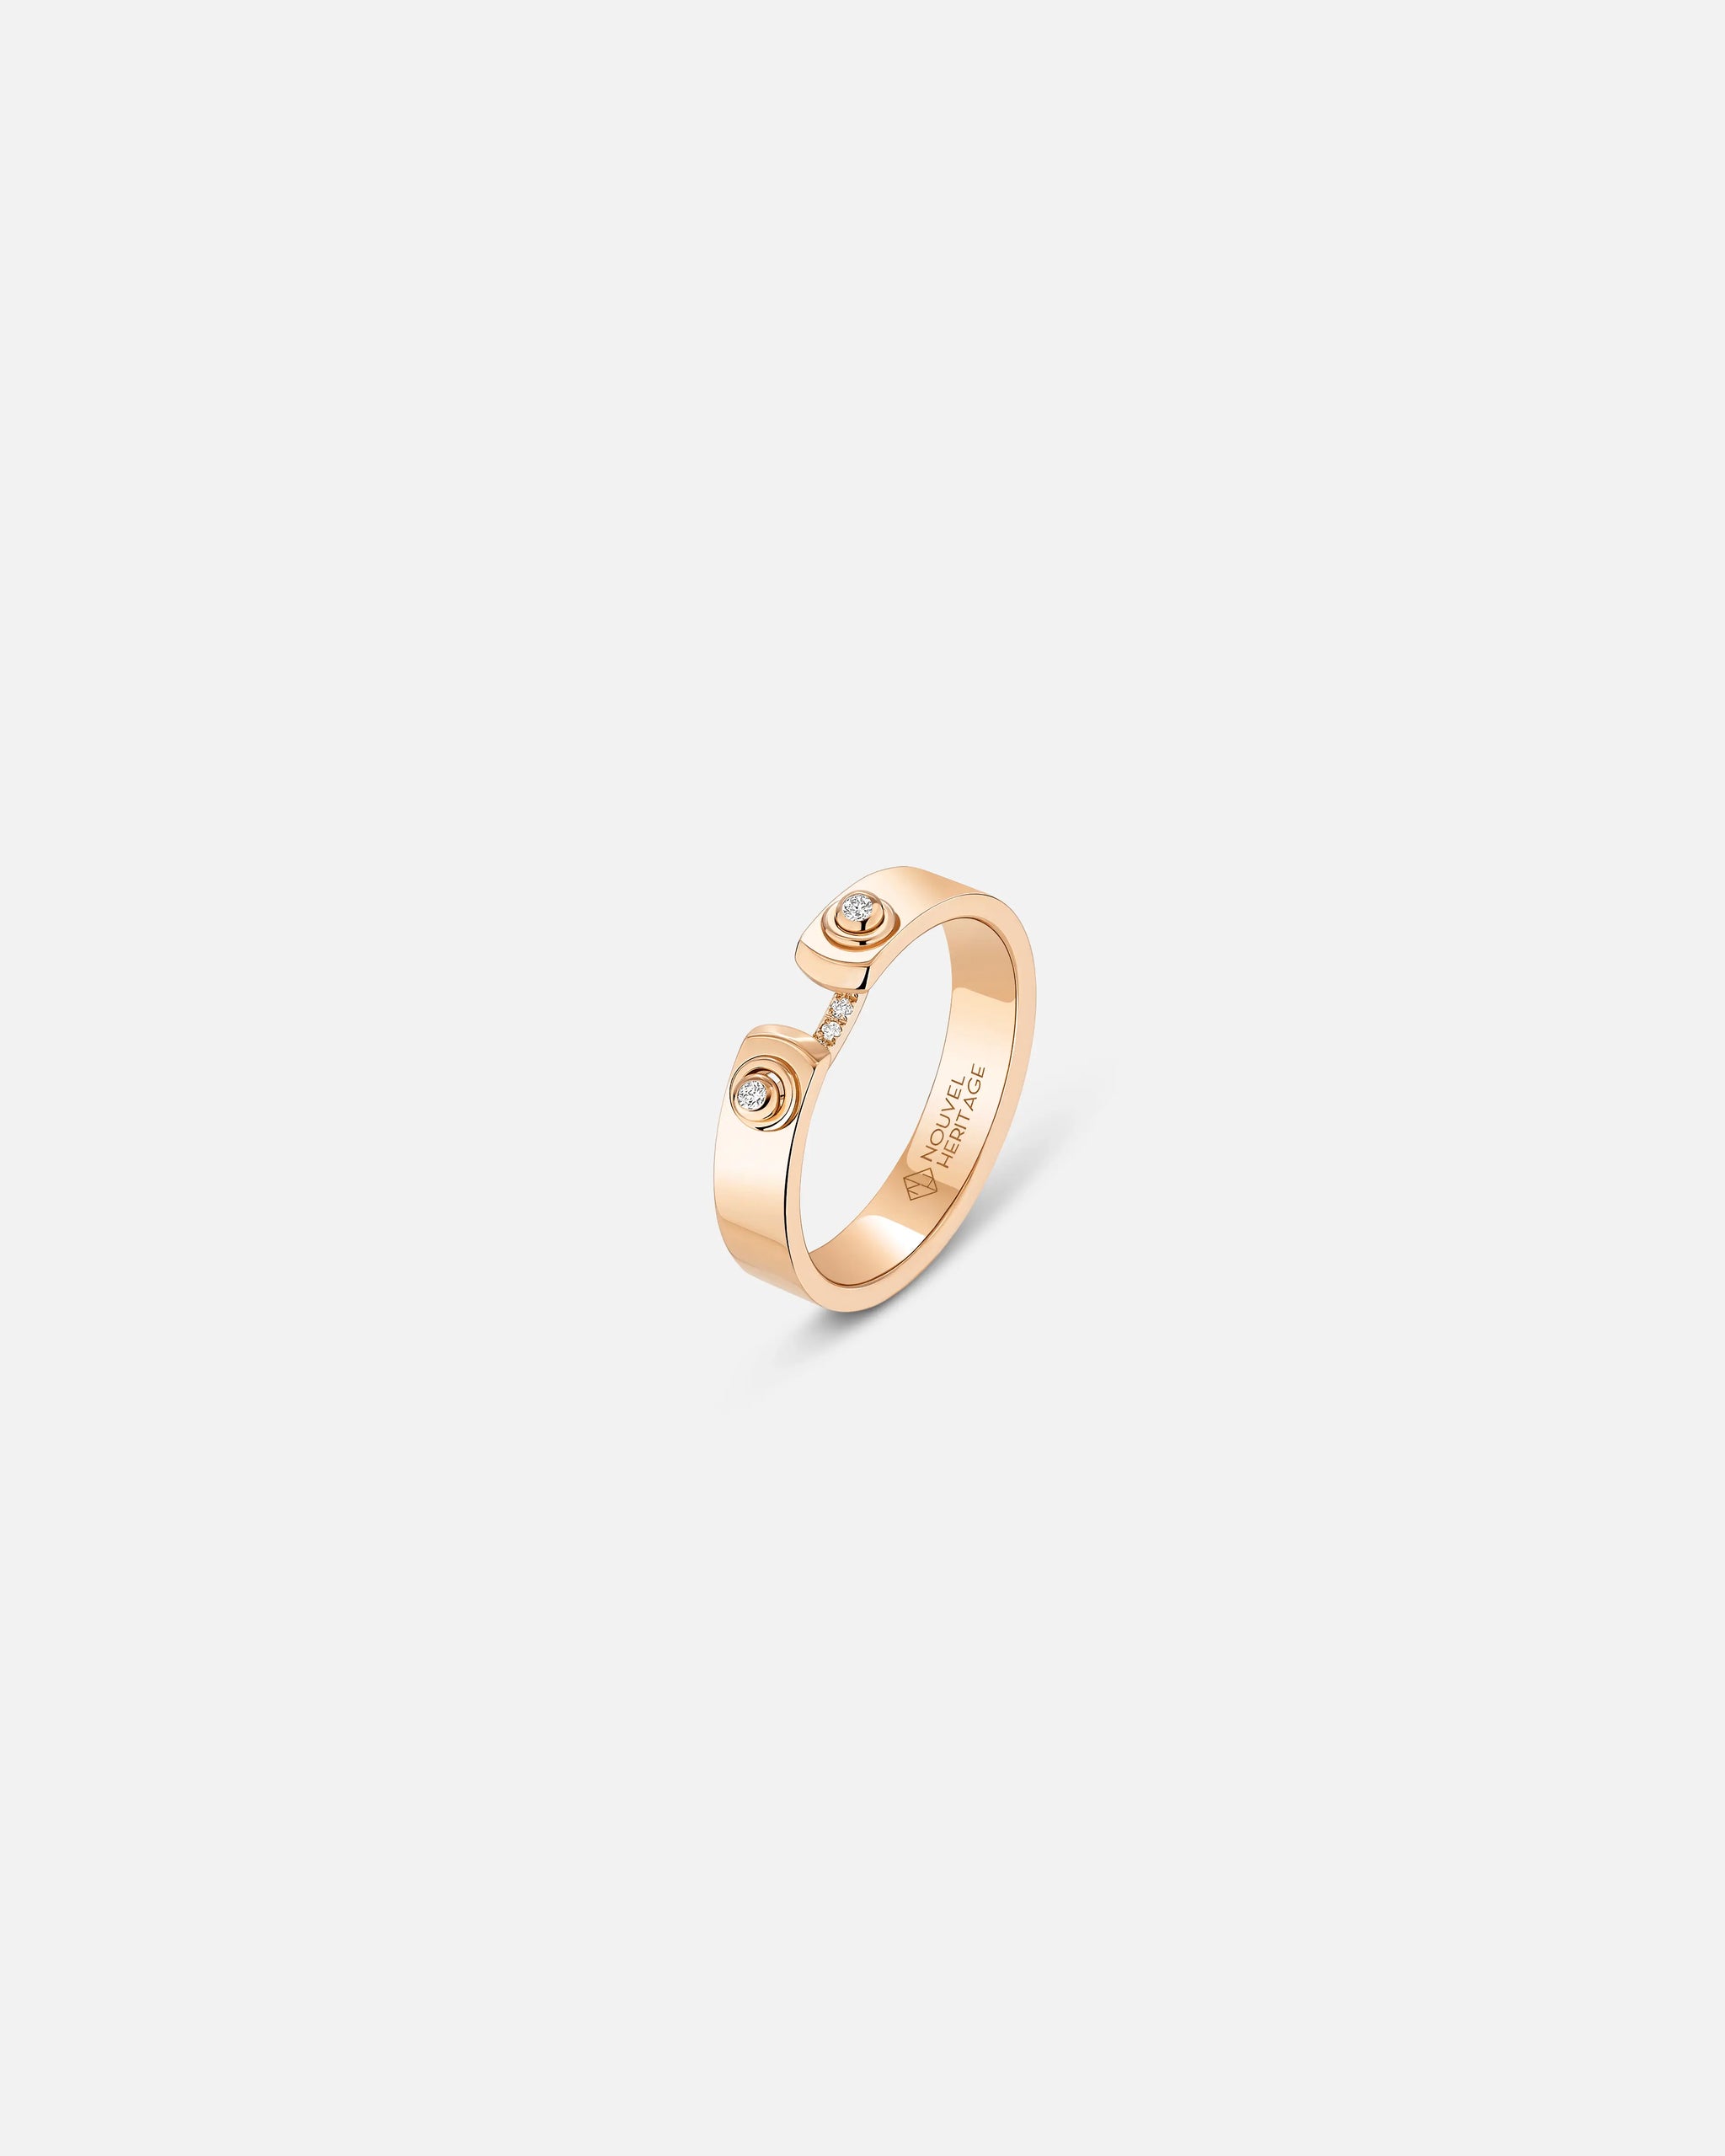 Business Meeting Mood Ring in Rose Gold - 1 - Nouvel Heritage